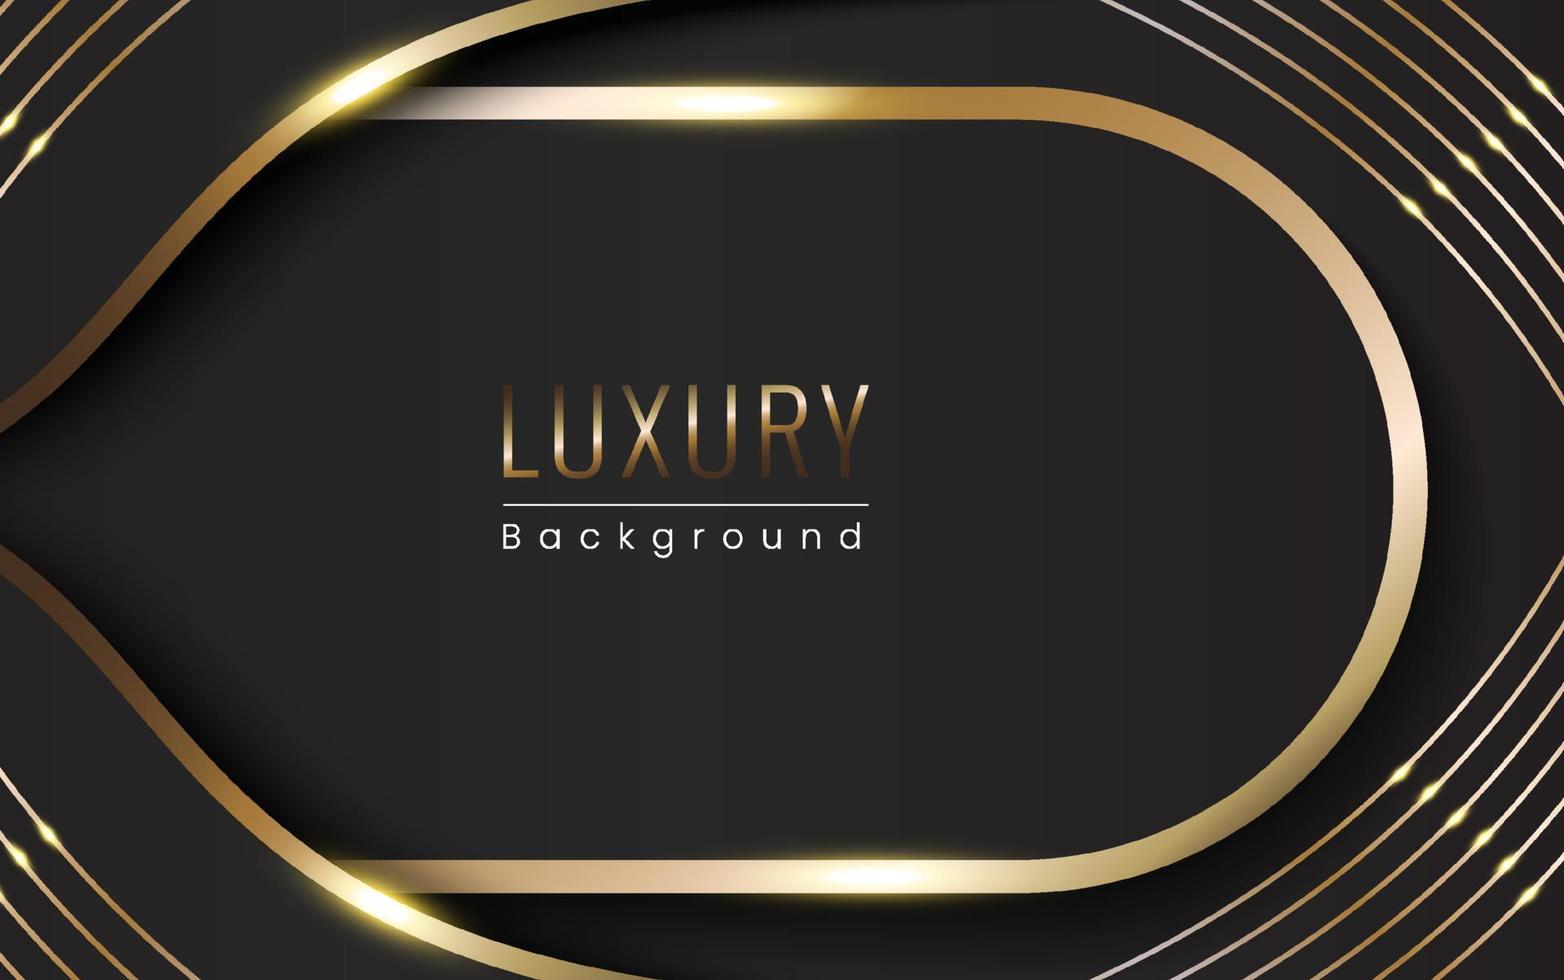 Abstract black and gold lines luxury background vector